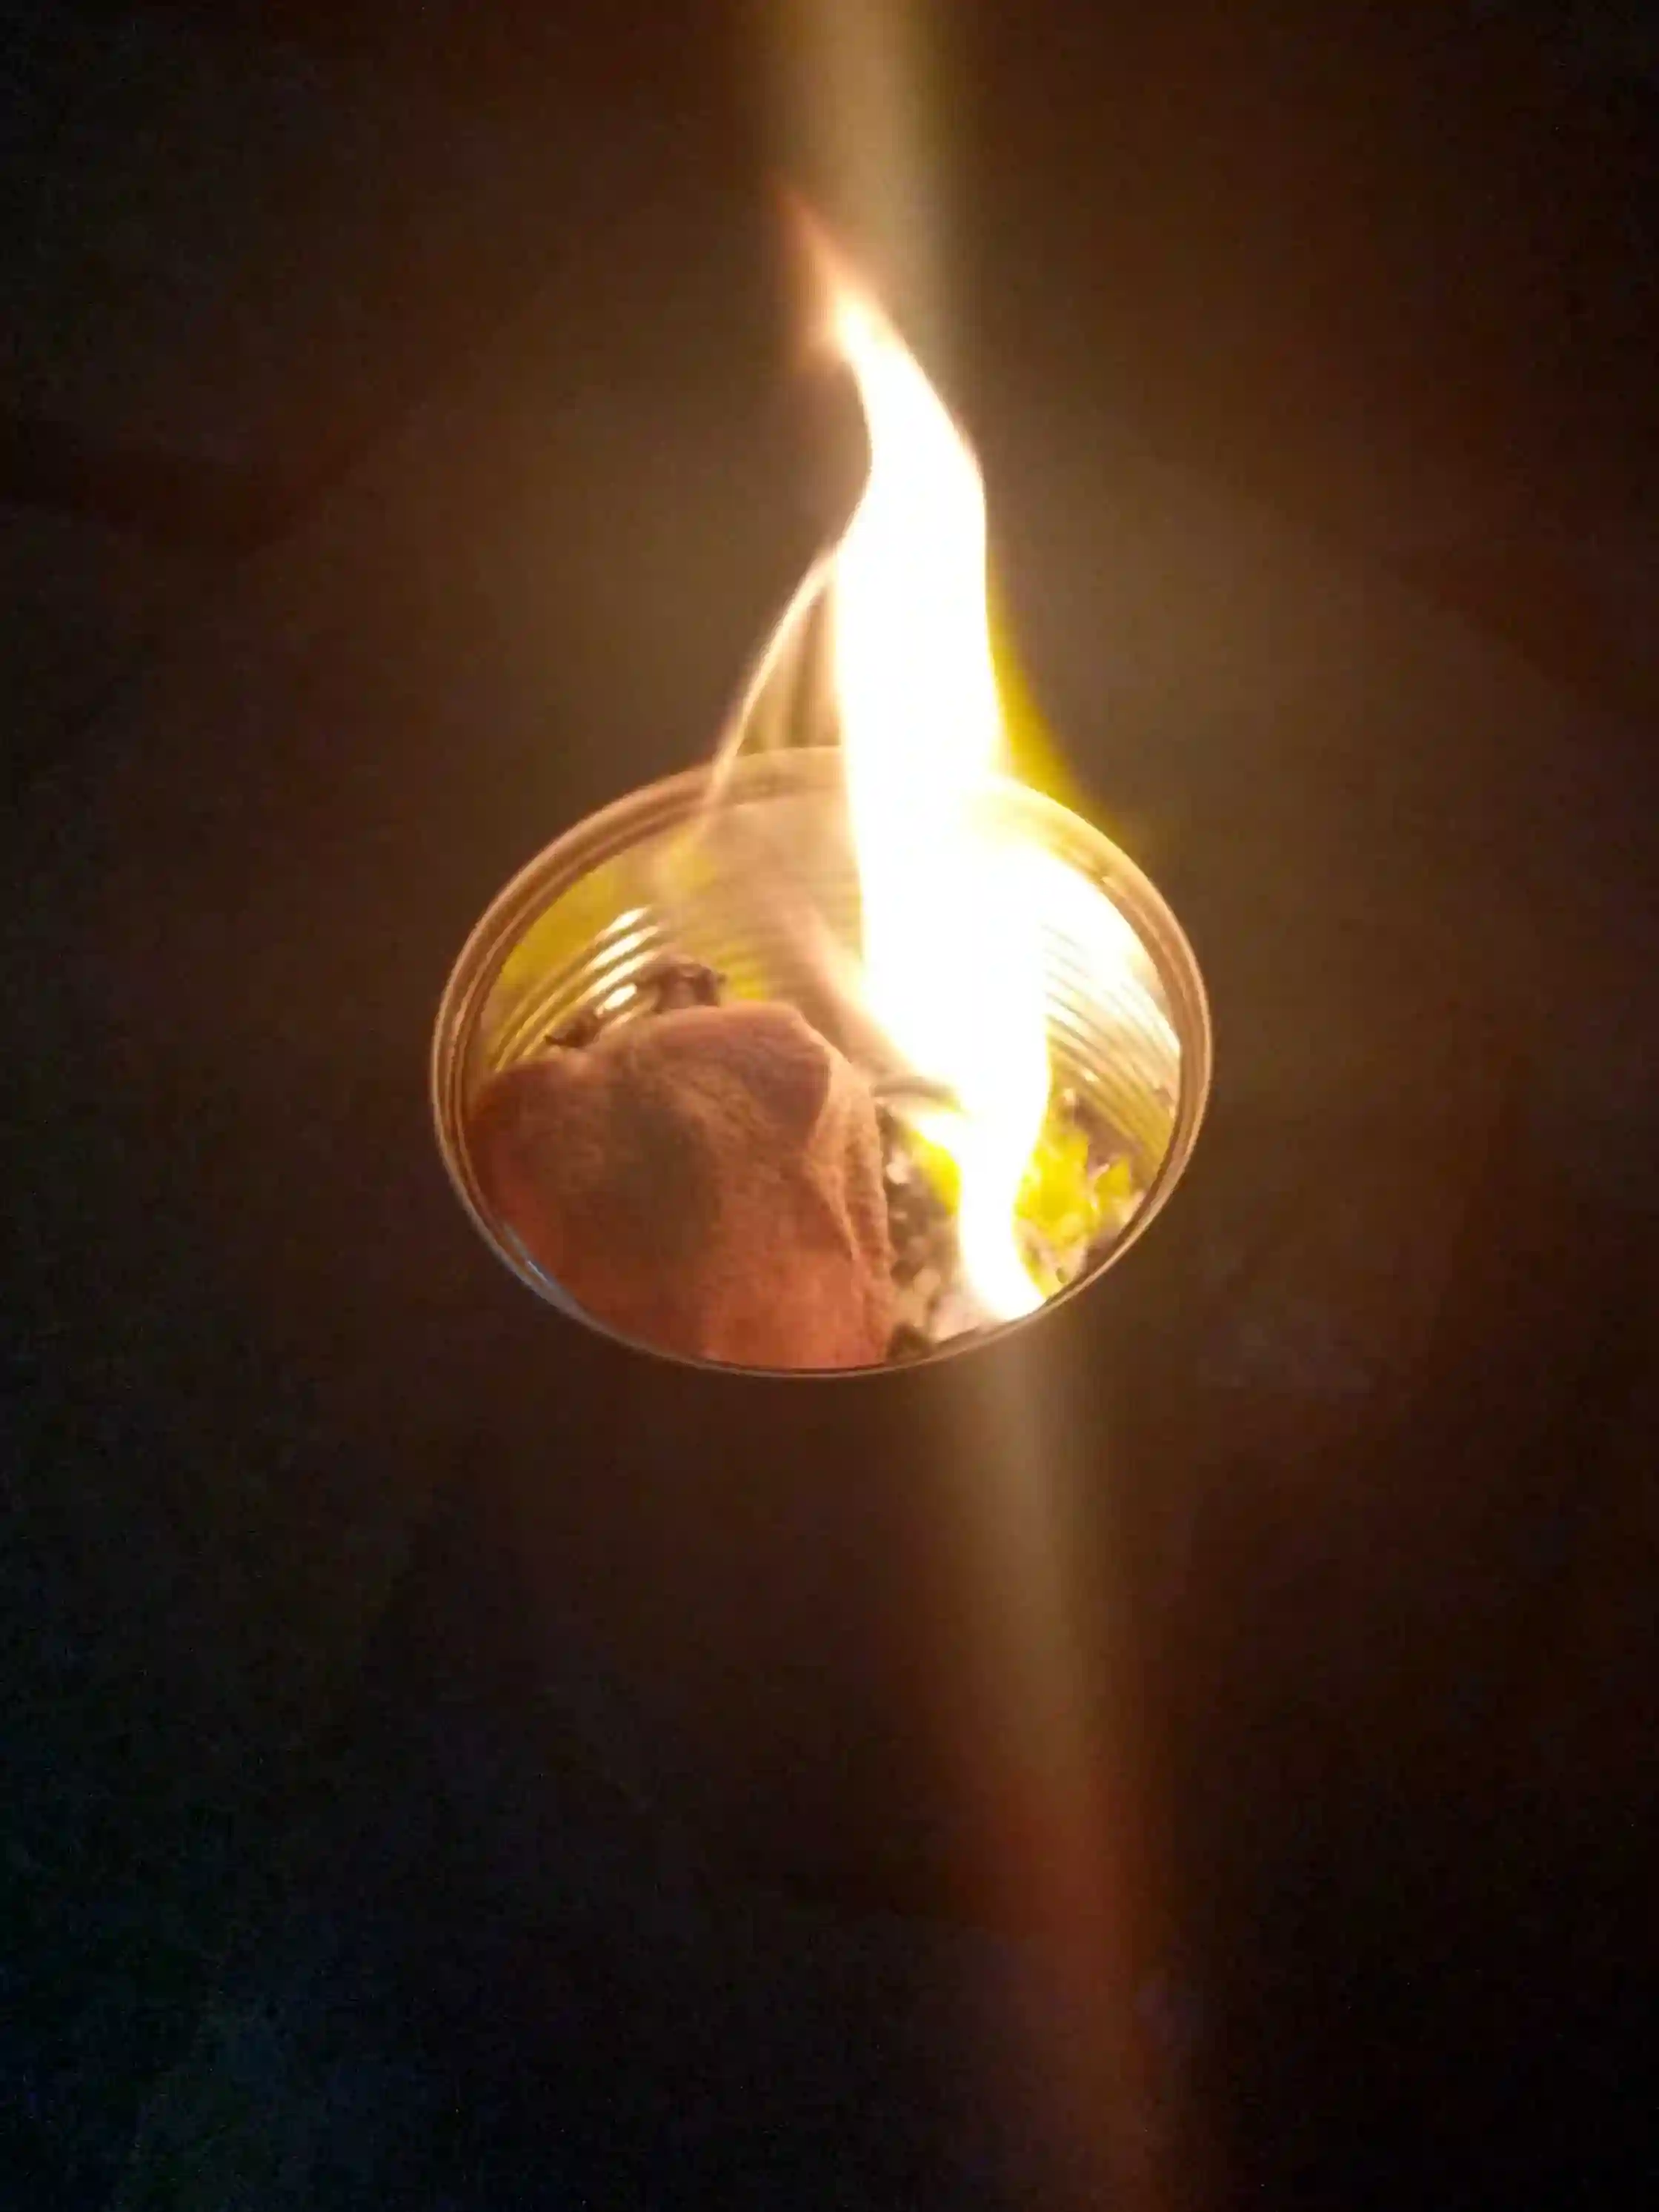 The lemon pig is burning in its can pyre